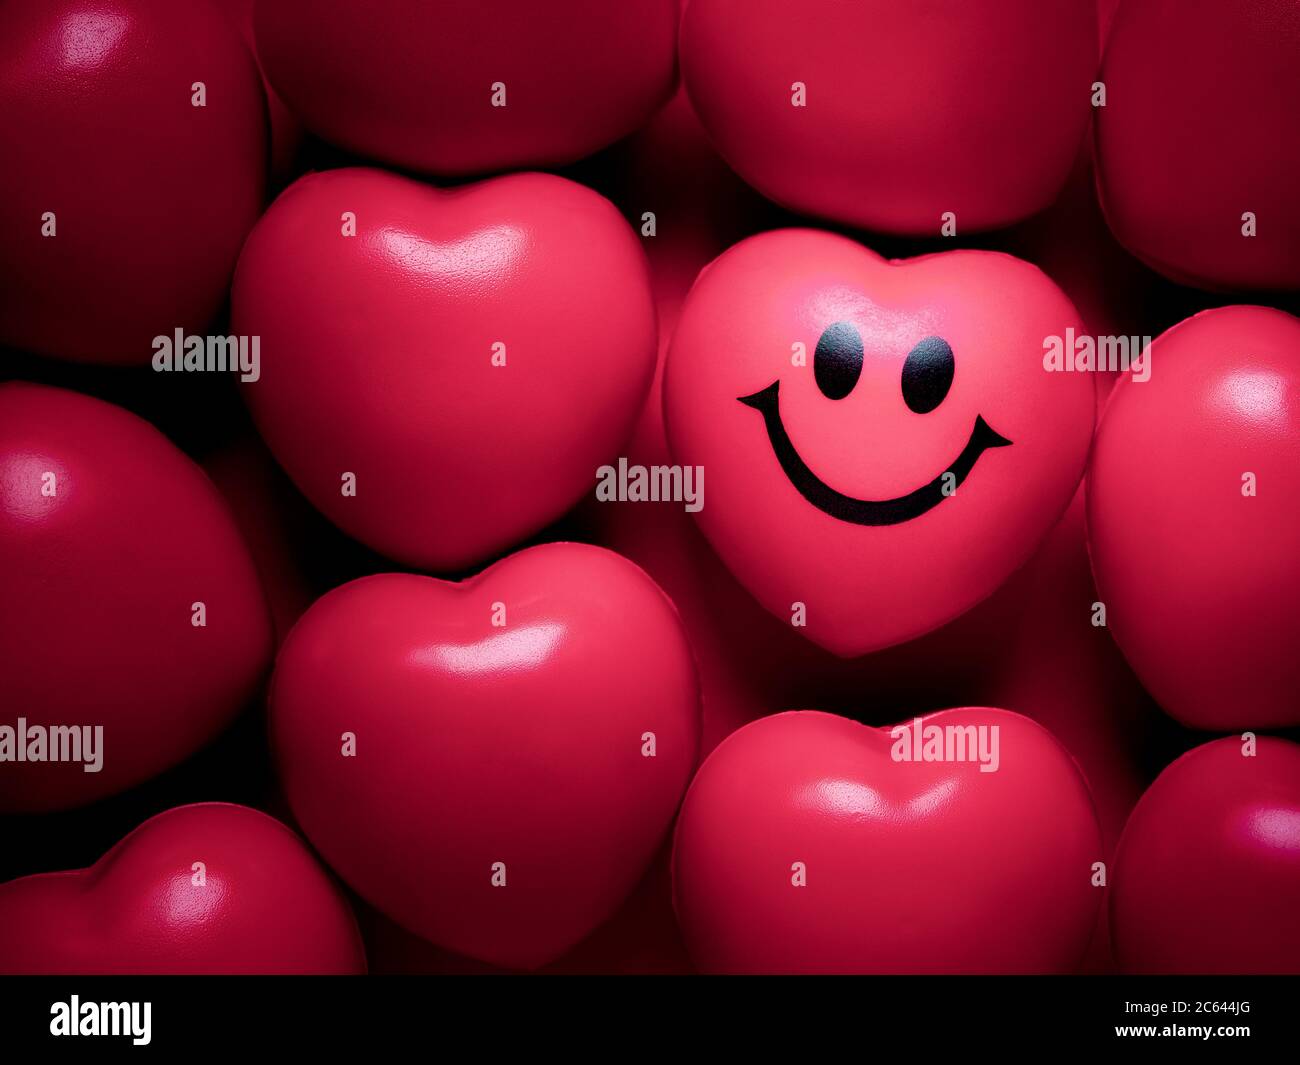 Hearts background. Pink heart with happy and smiling face among ...